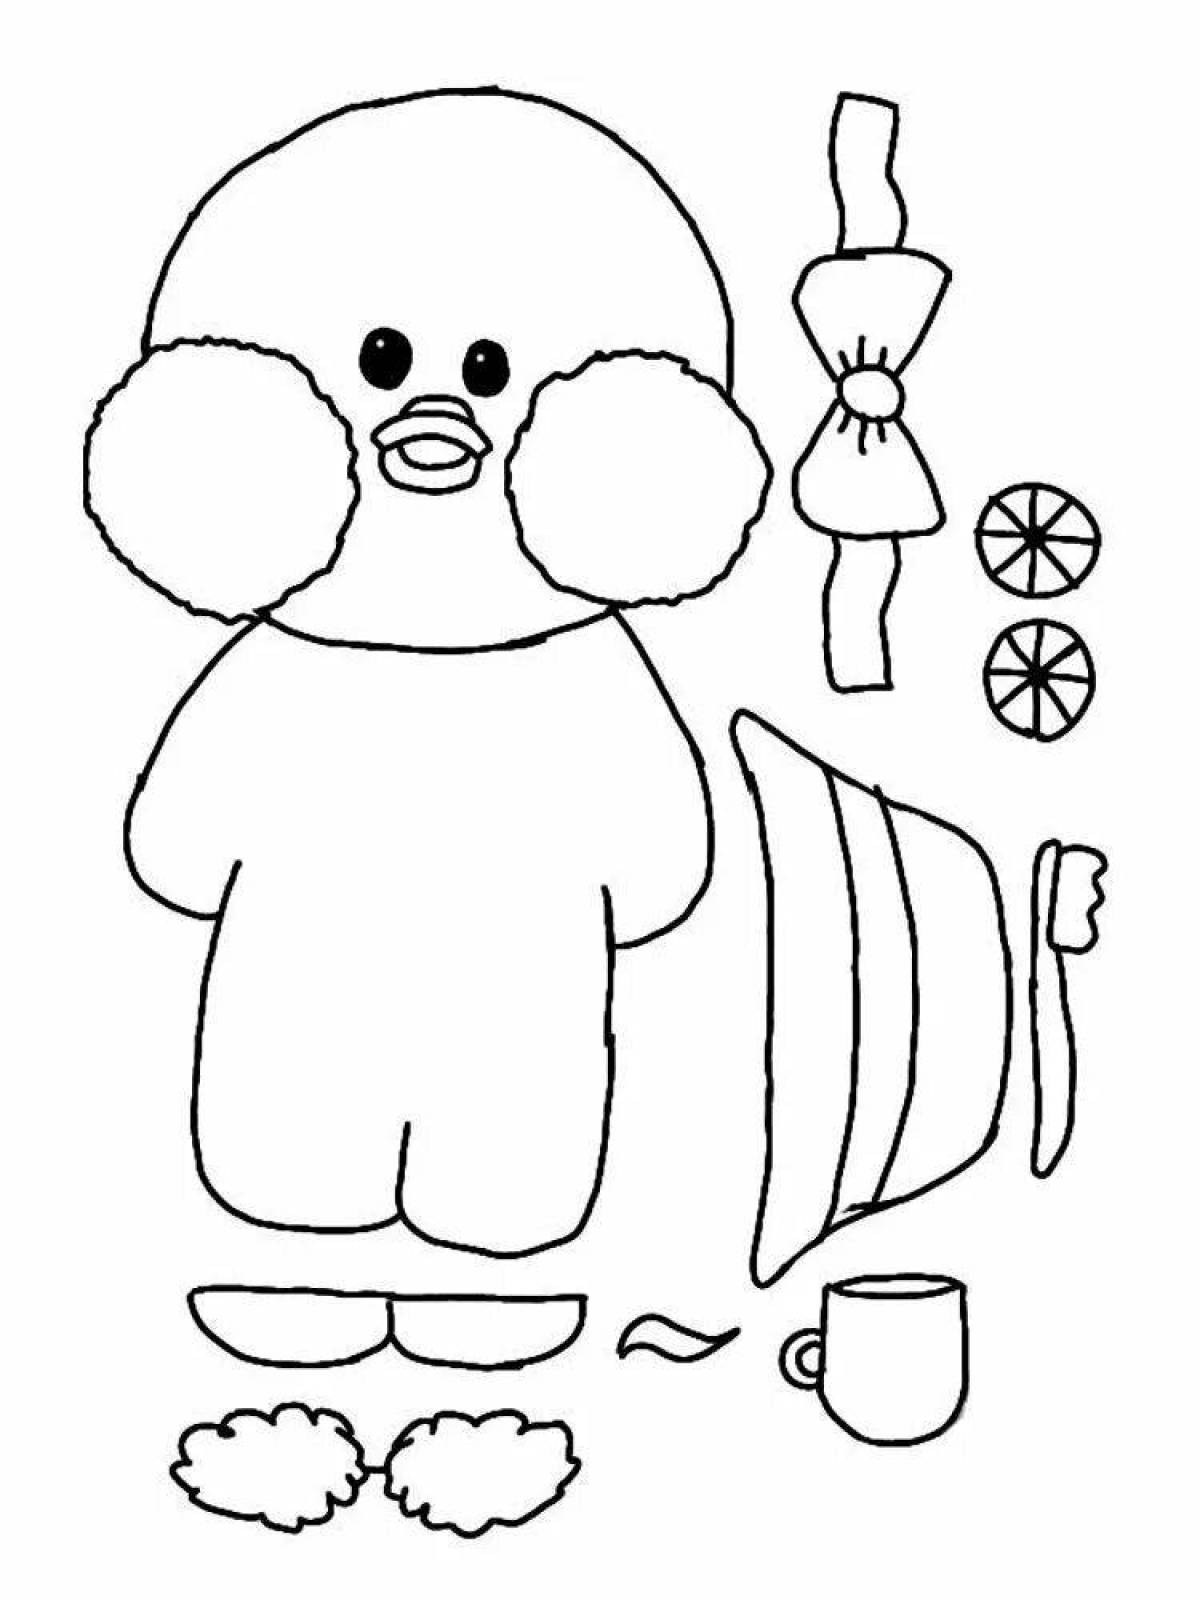 Charming duck lafanfan coloring book